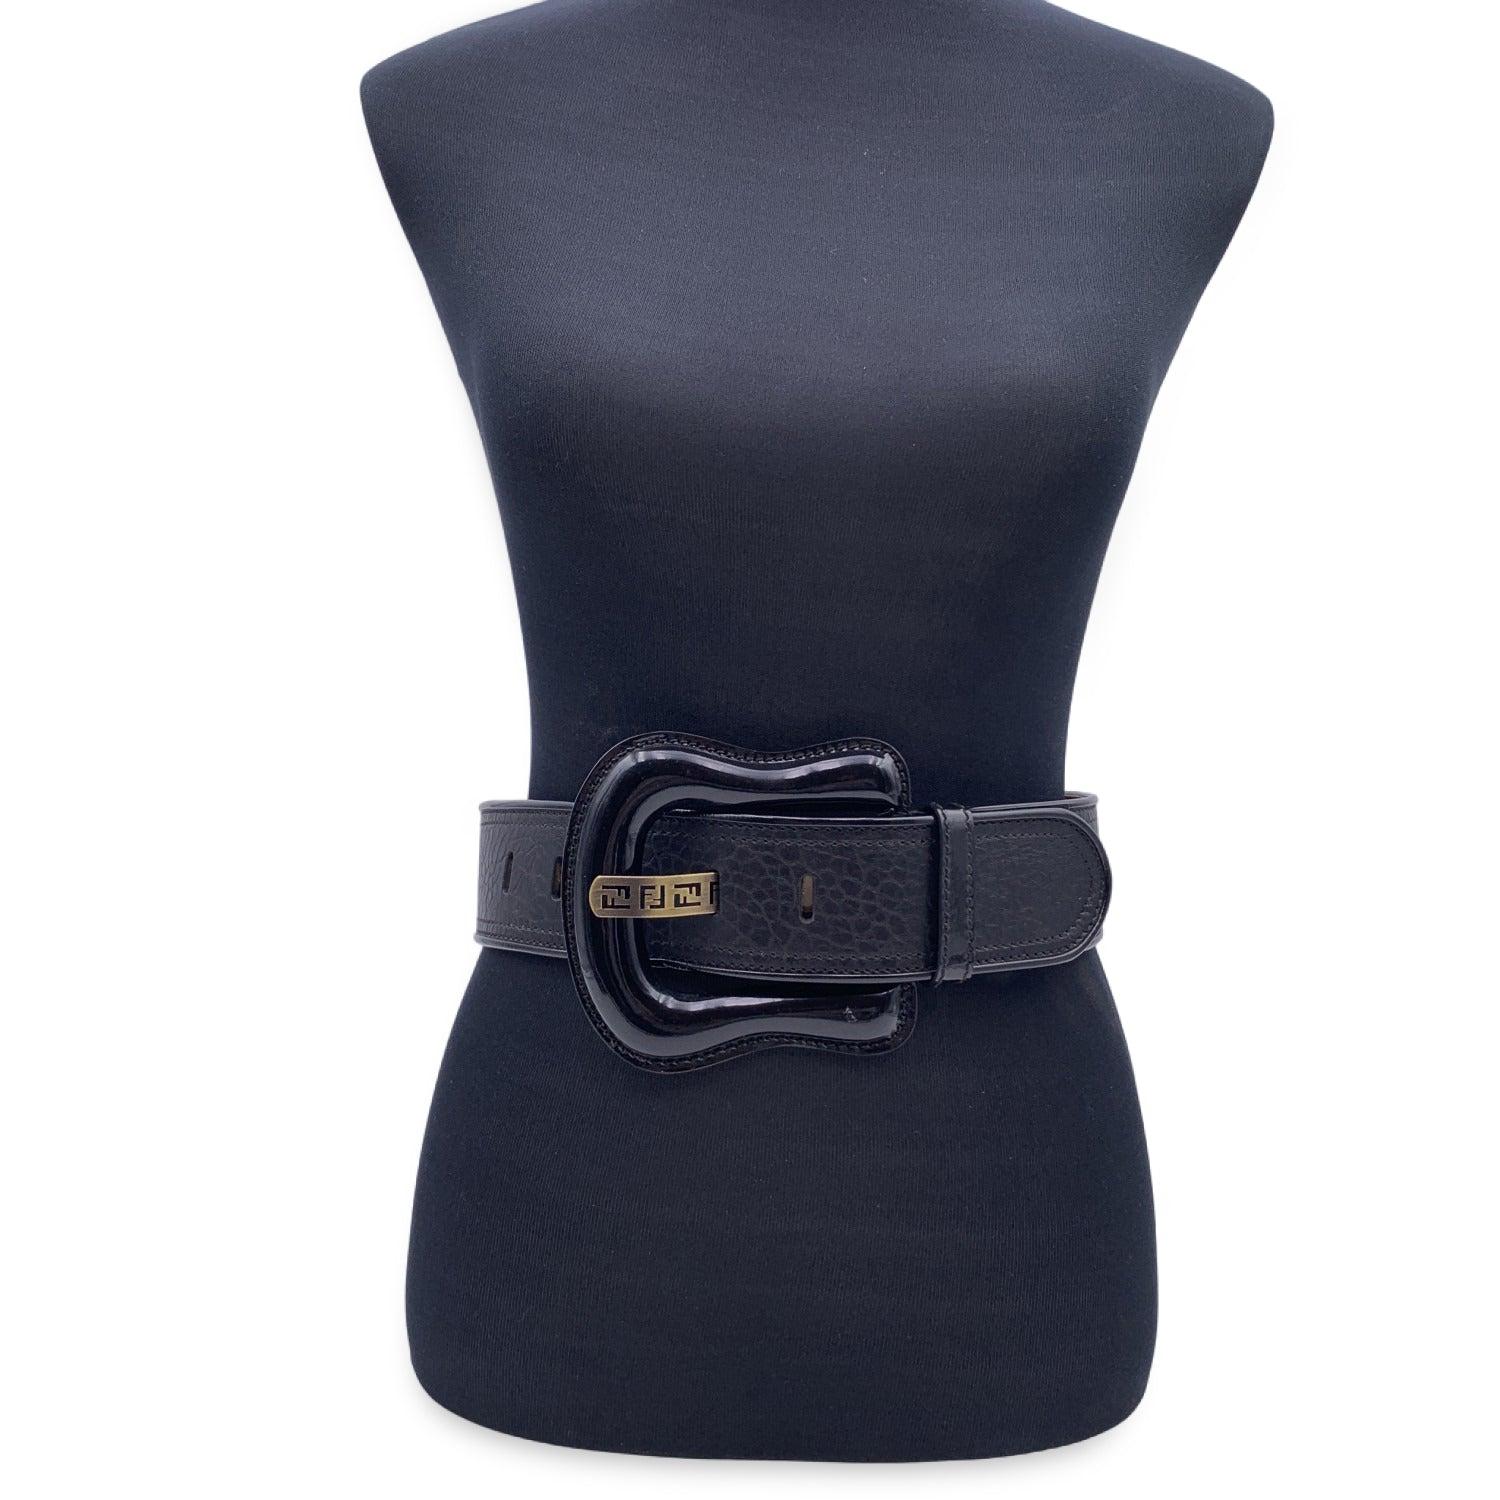 Fendi B Buckle Wide Belt. Black leather and black patent leather oversized buckle with logo-cutouts on the pin. Width: 2.25 inches - 5.6 cm. 'FENDI' engraved on the reverse of the buckle. 5 holes adjustament. Total length (Only leather): 34 inches -